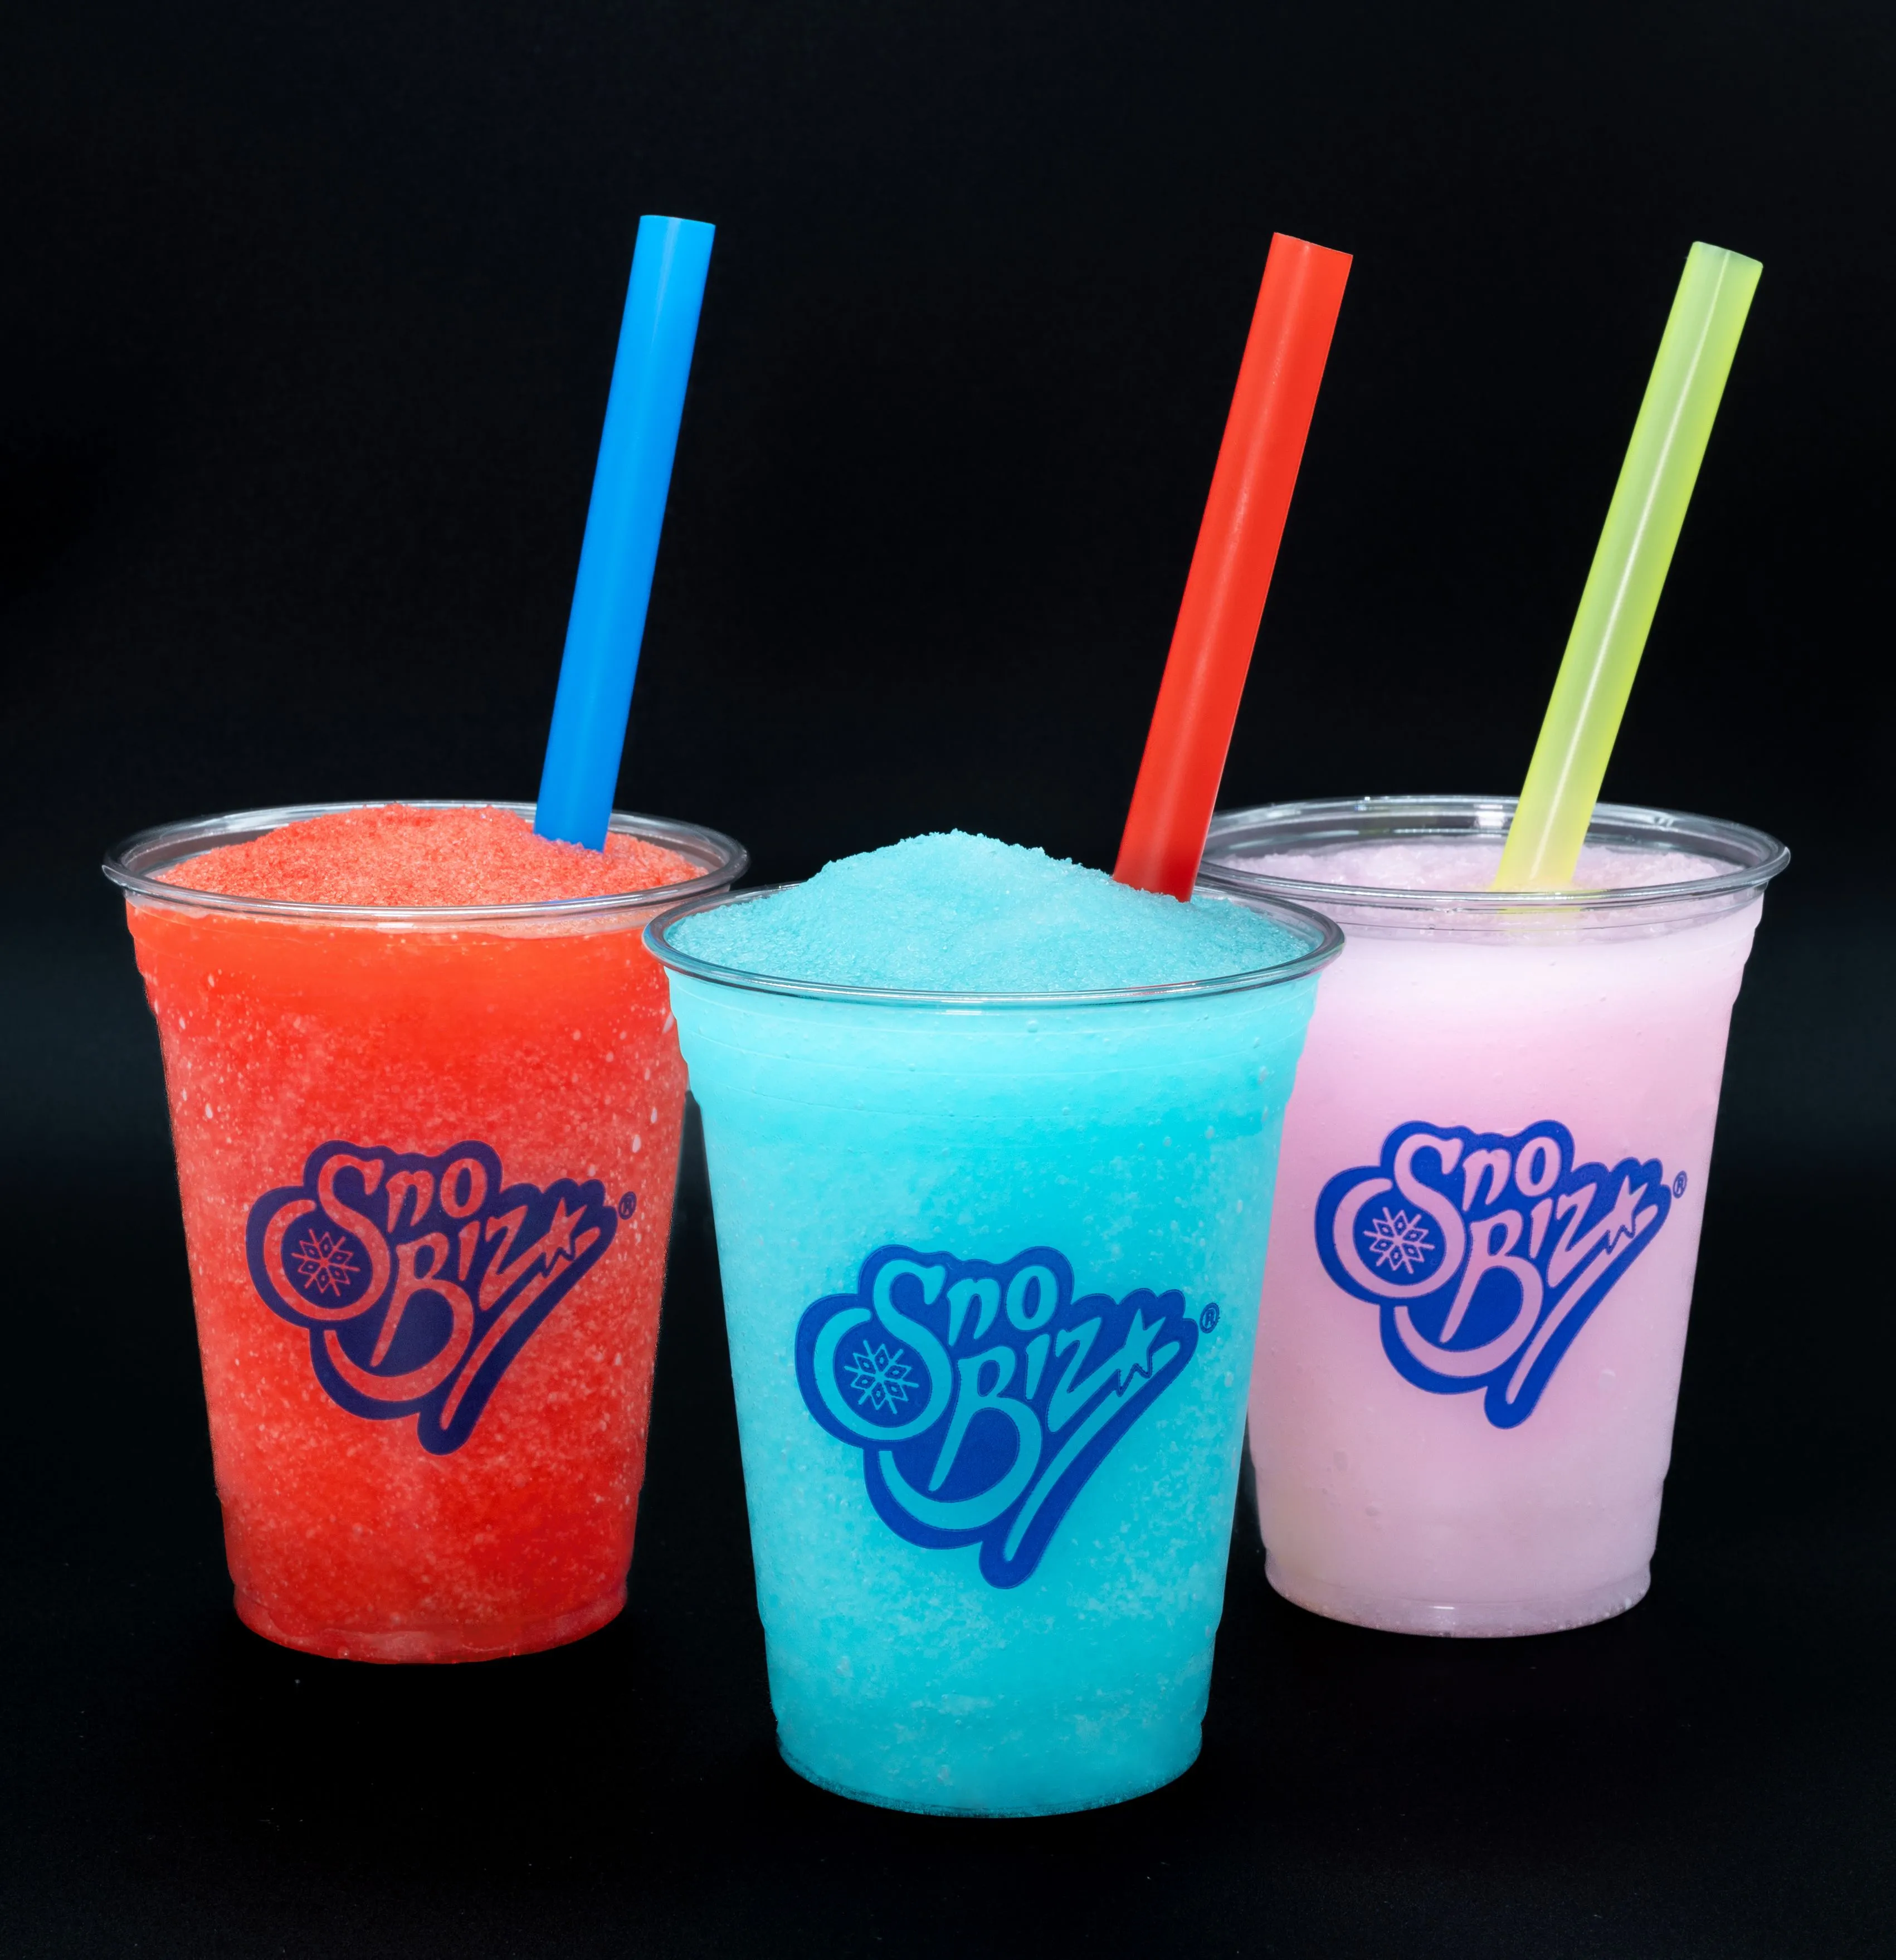 Three colorful frozen drinks with straws, branded as Sno Biz, on a black background.